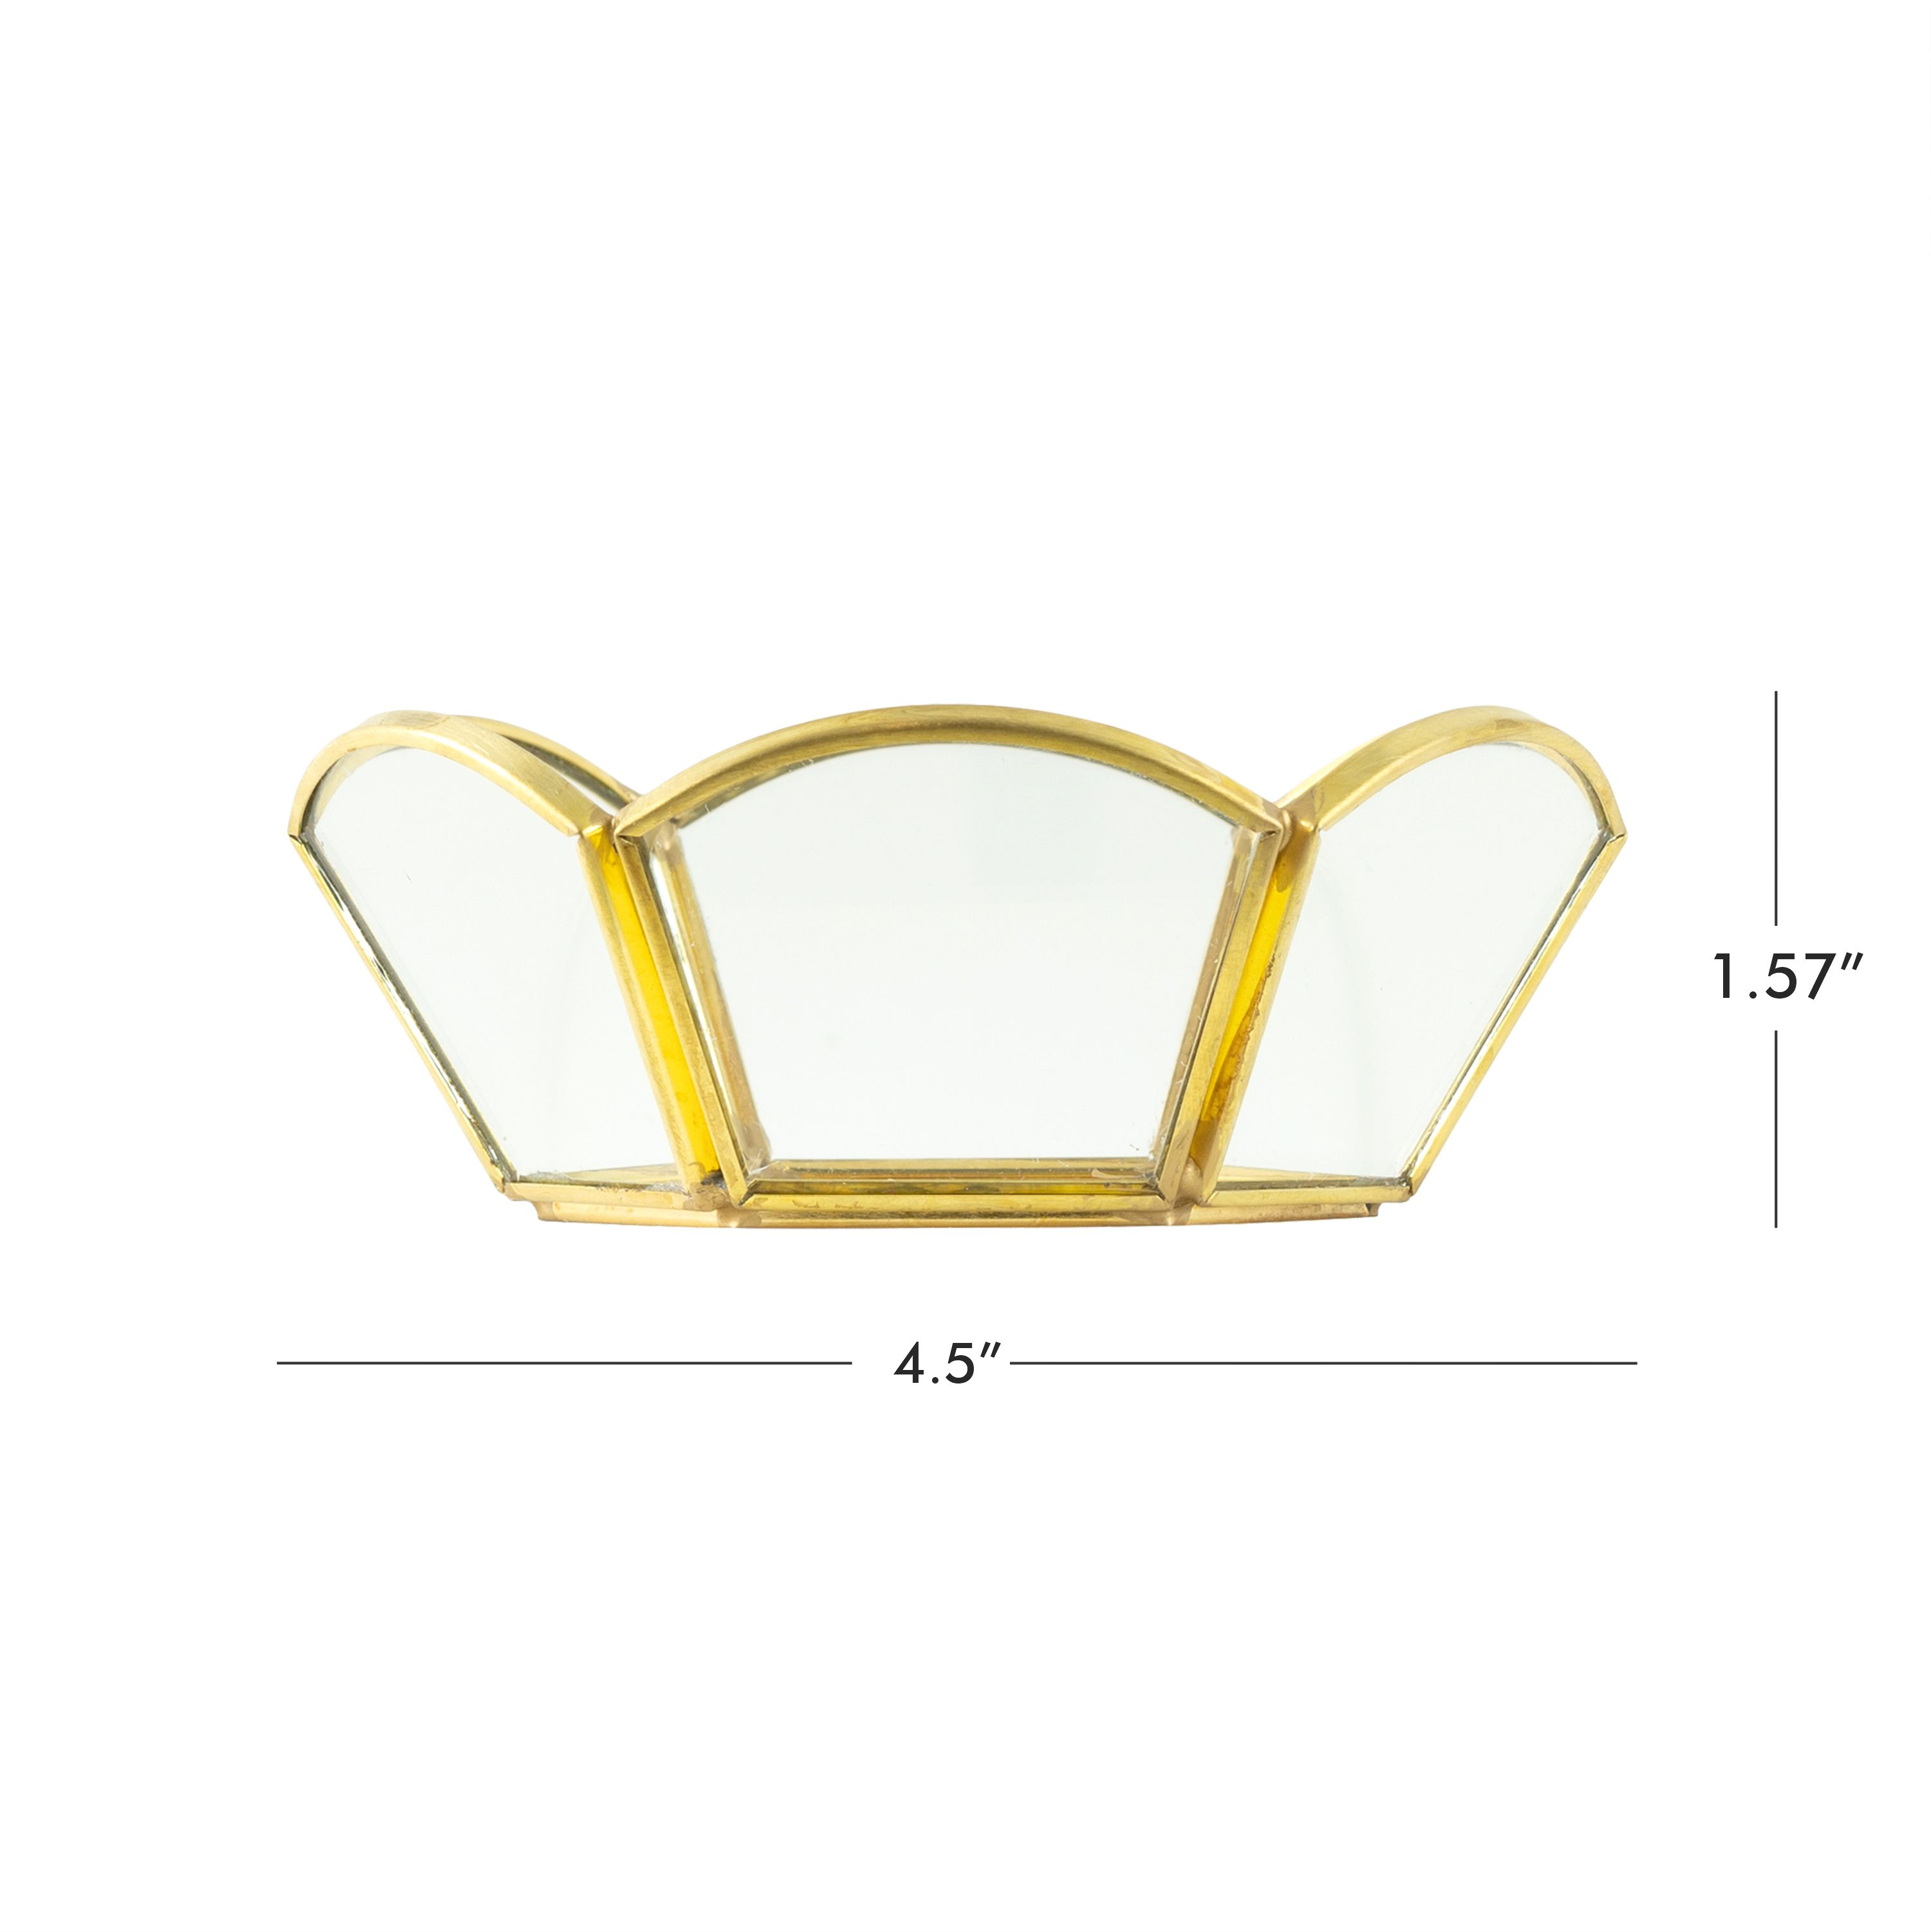 Brass and Glass Gold 4.4" Tabletop Trinket Tray with Decorative Petals - image 3 of 7